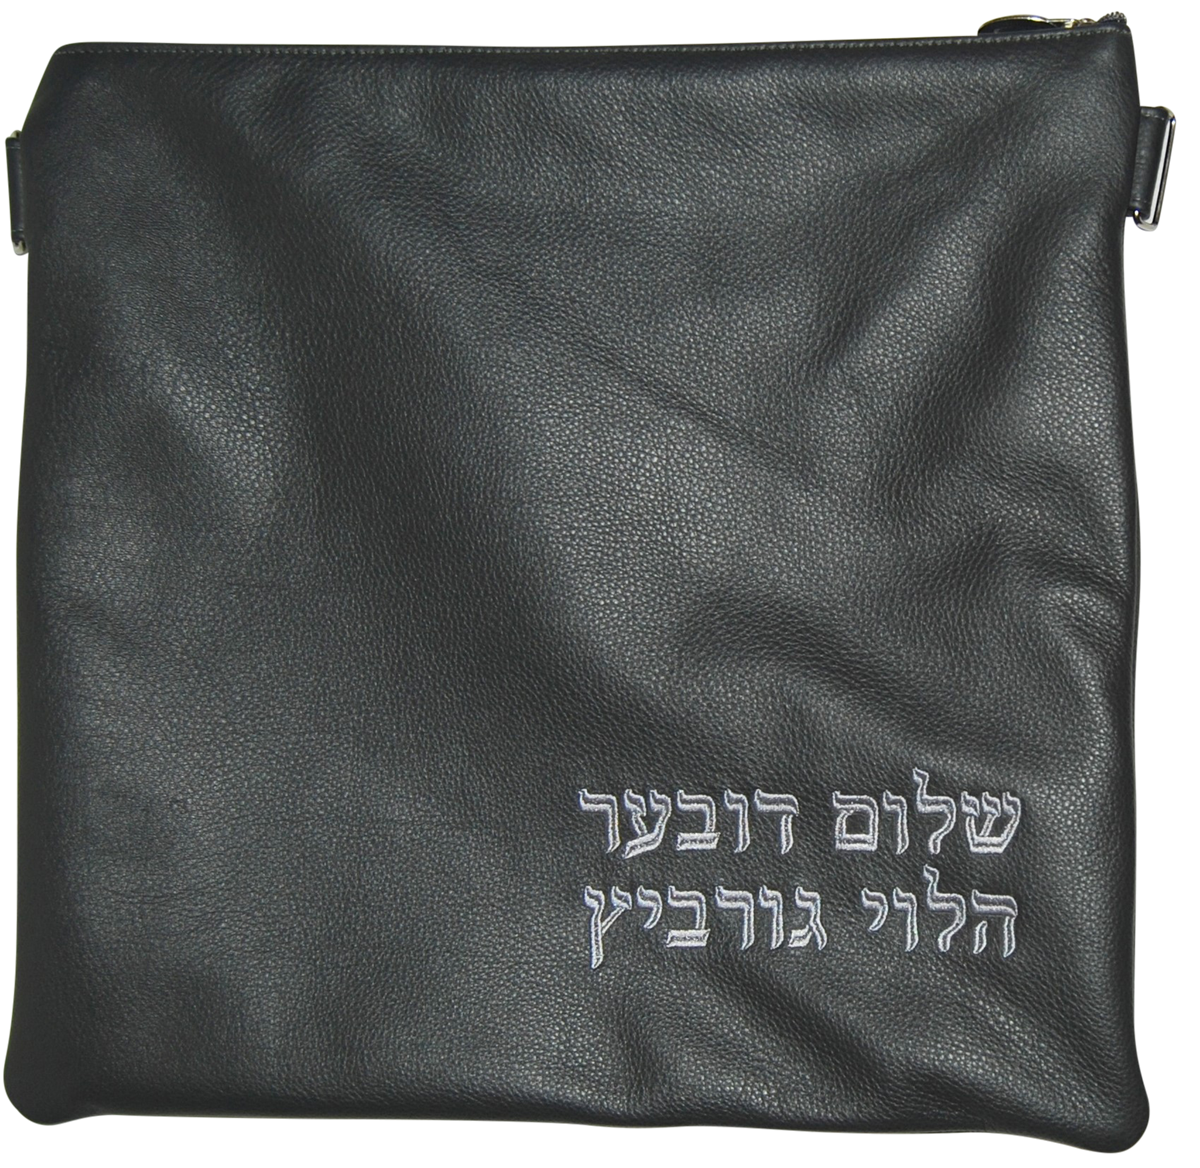 Charcoal leather Classic Tallis and Tefillin bag